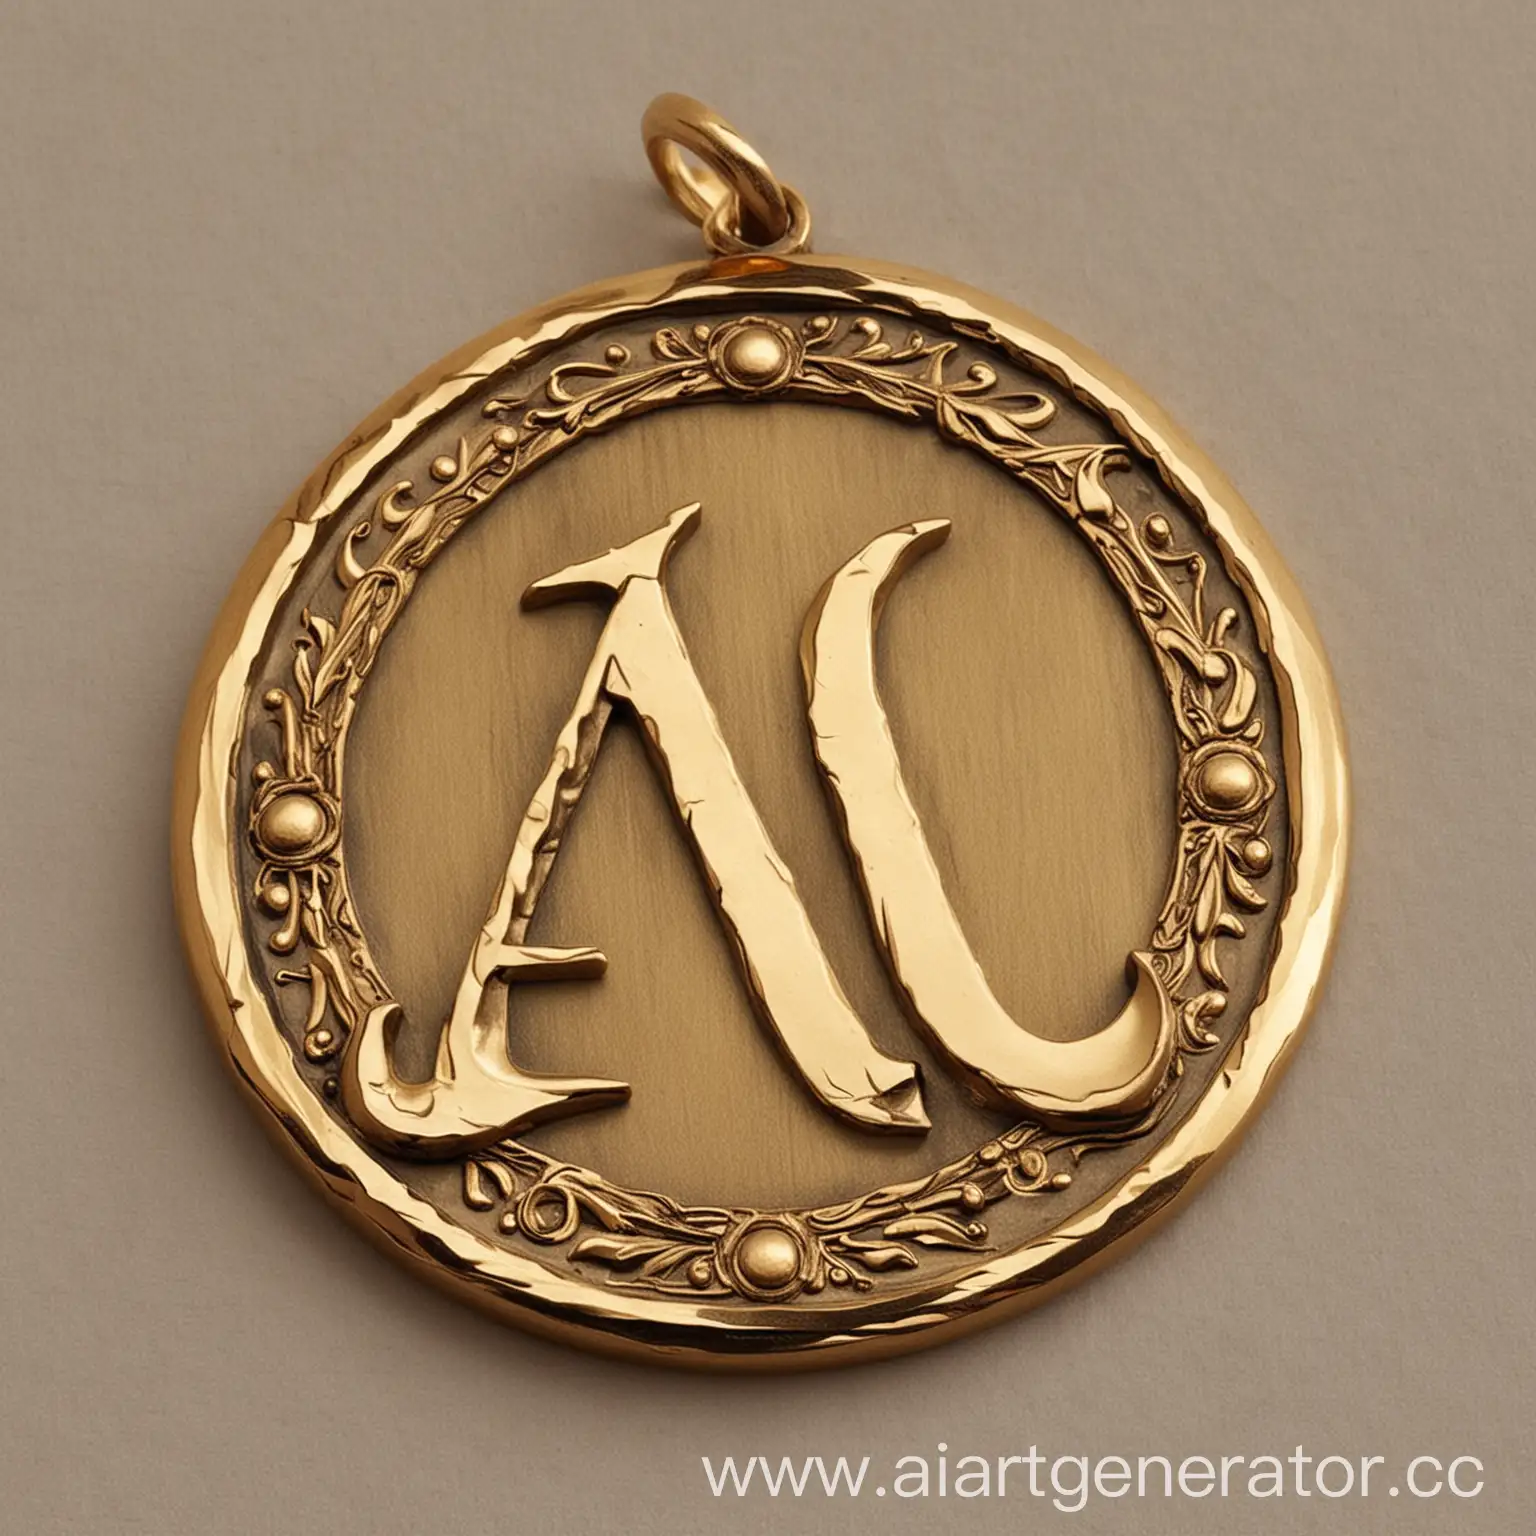 Golden-Round-Medallion-Named-Ariina-with-Letter-A-Adornment